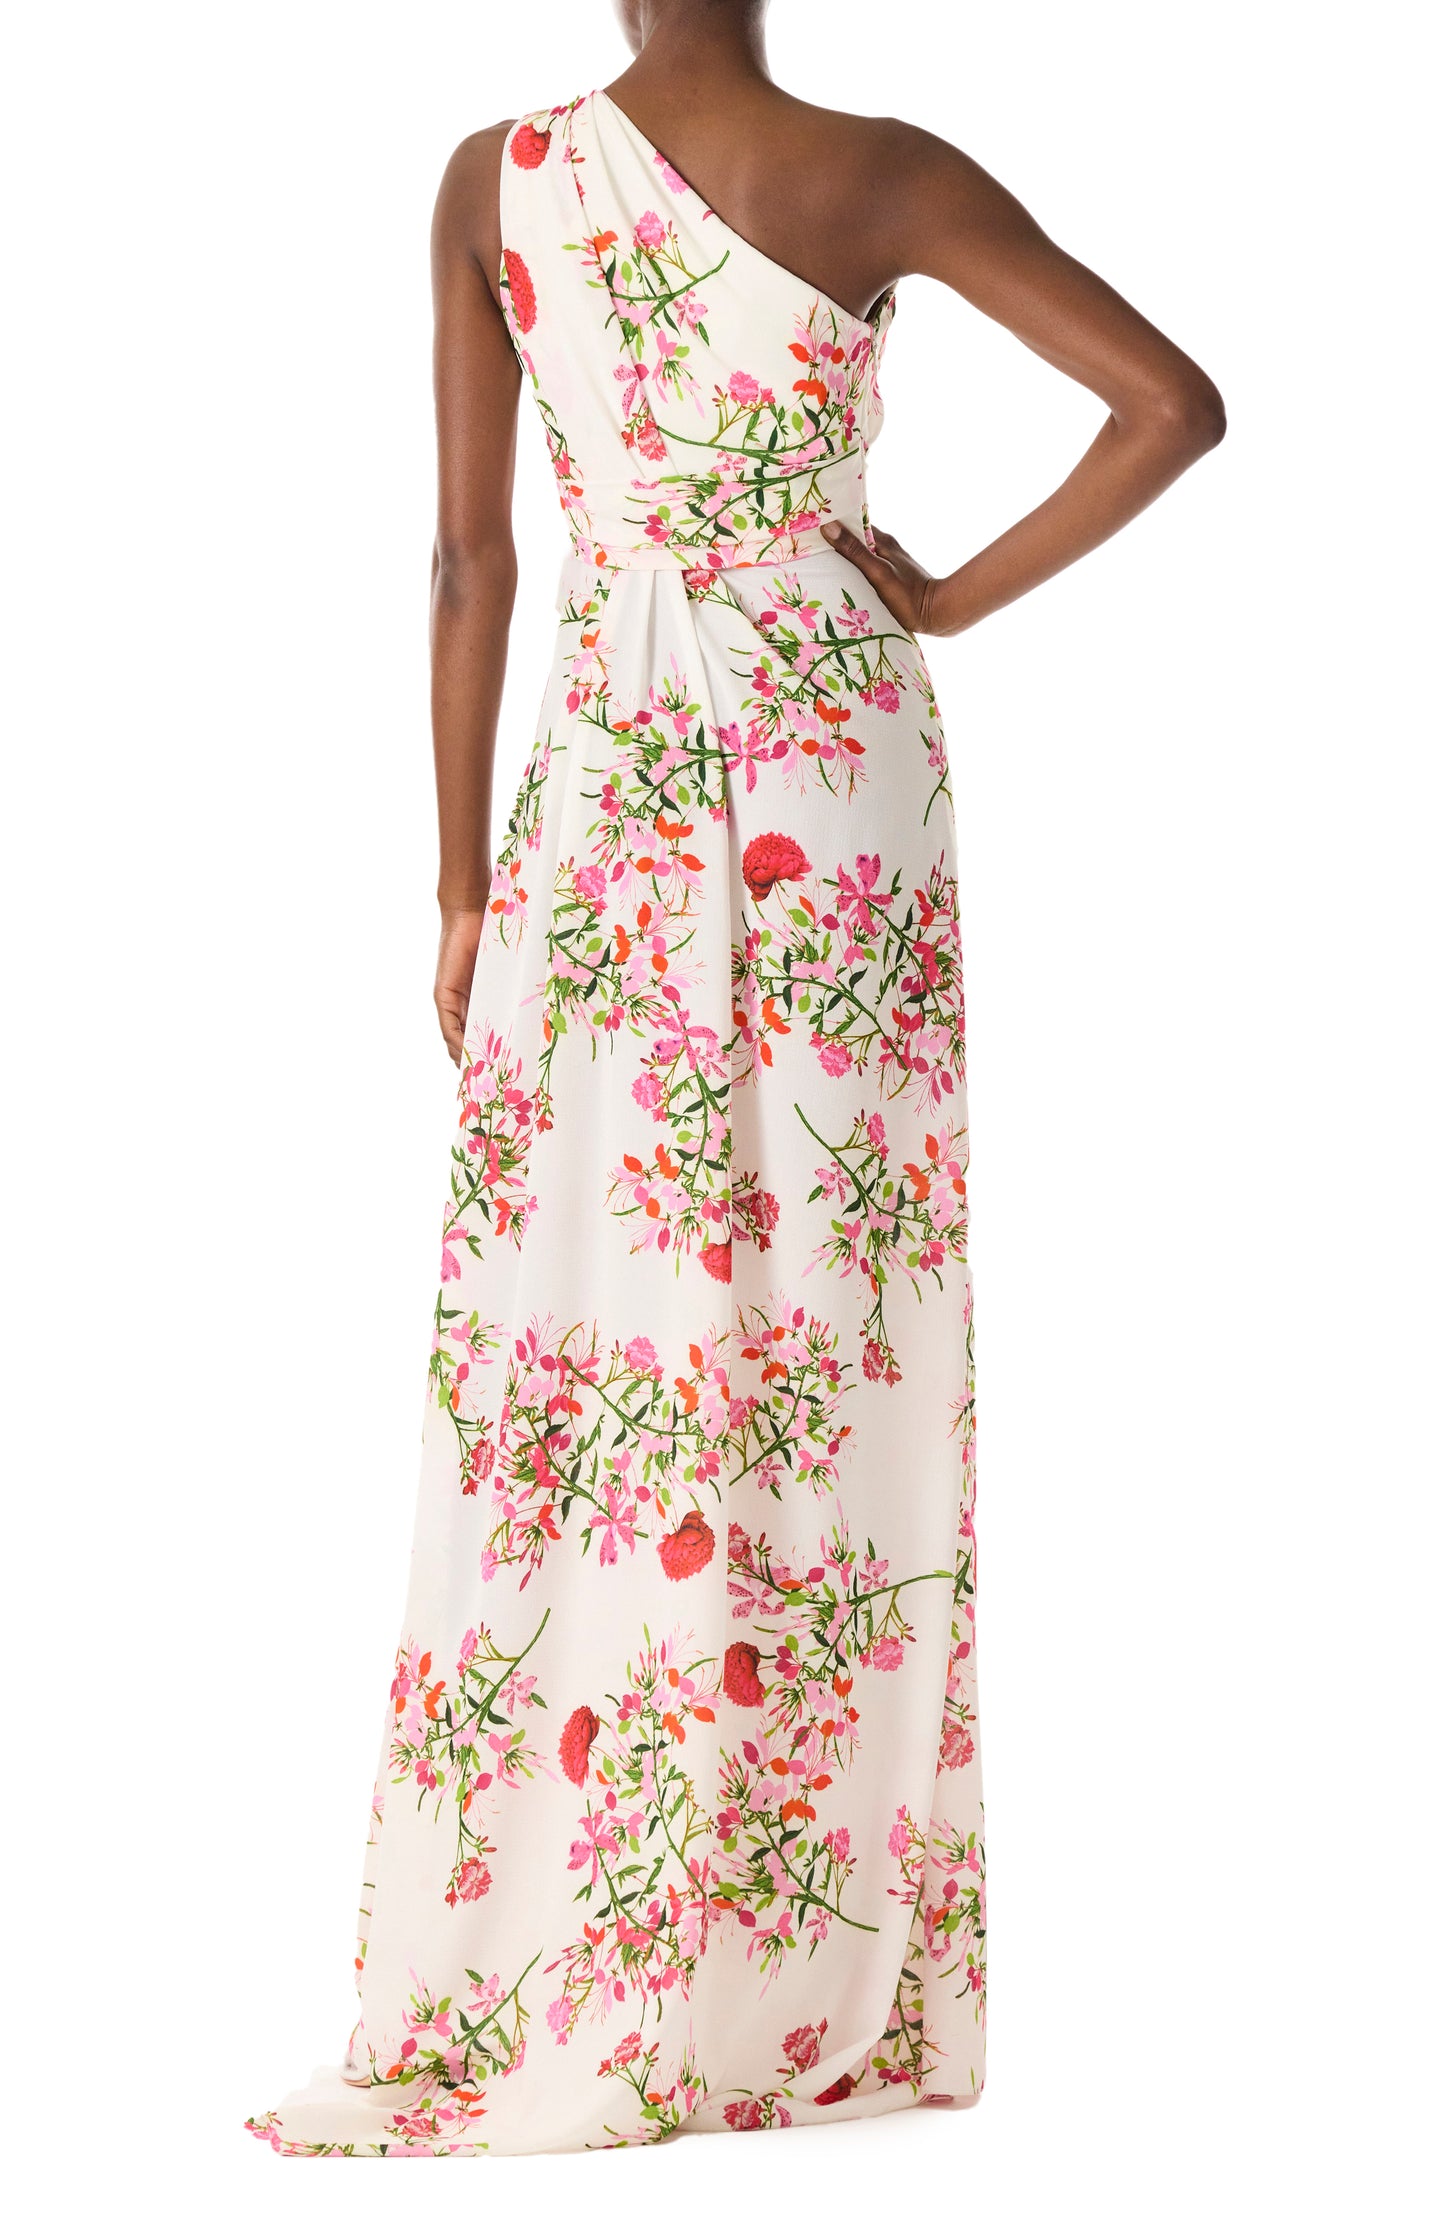 Monique Lhuillier One shoulder draped gown with self-tie belt and high front slit in Silk White Fuchsia floral printed crepe - back.